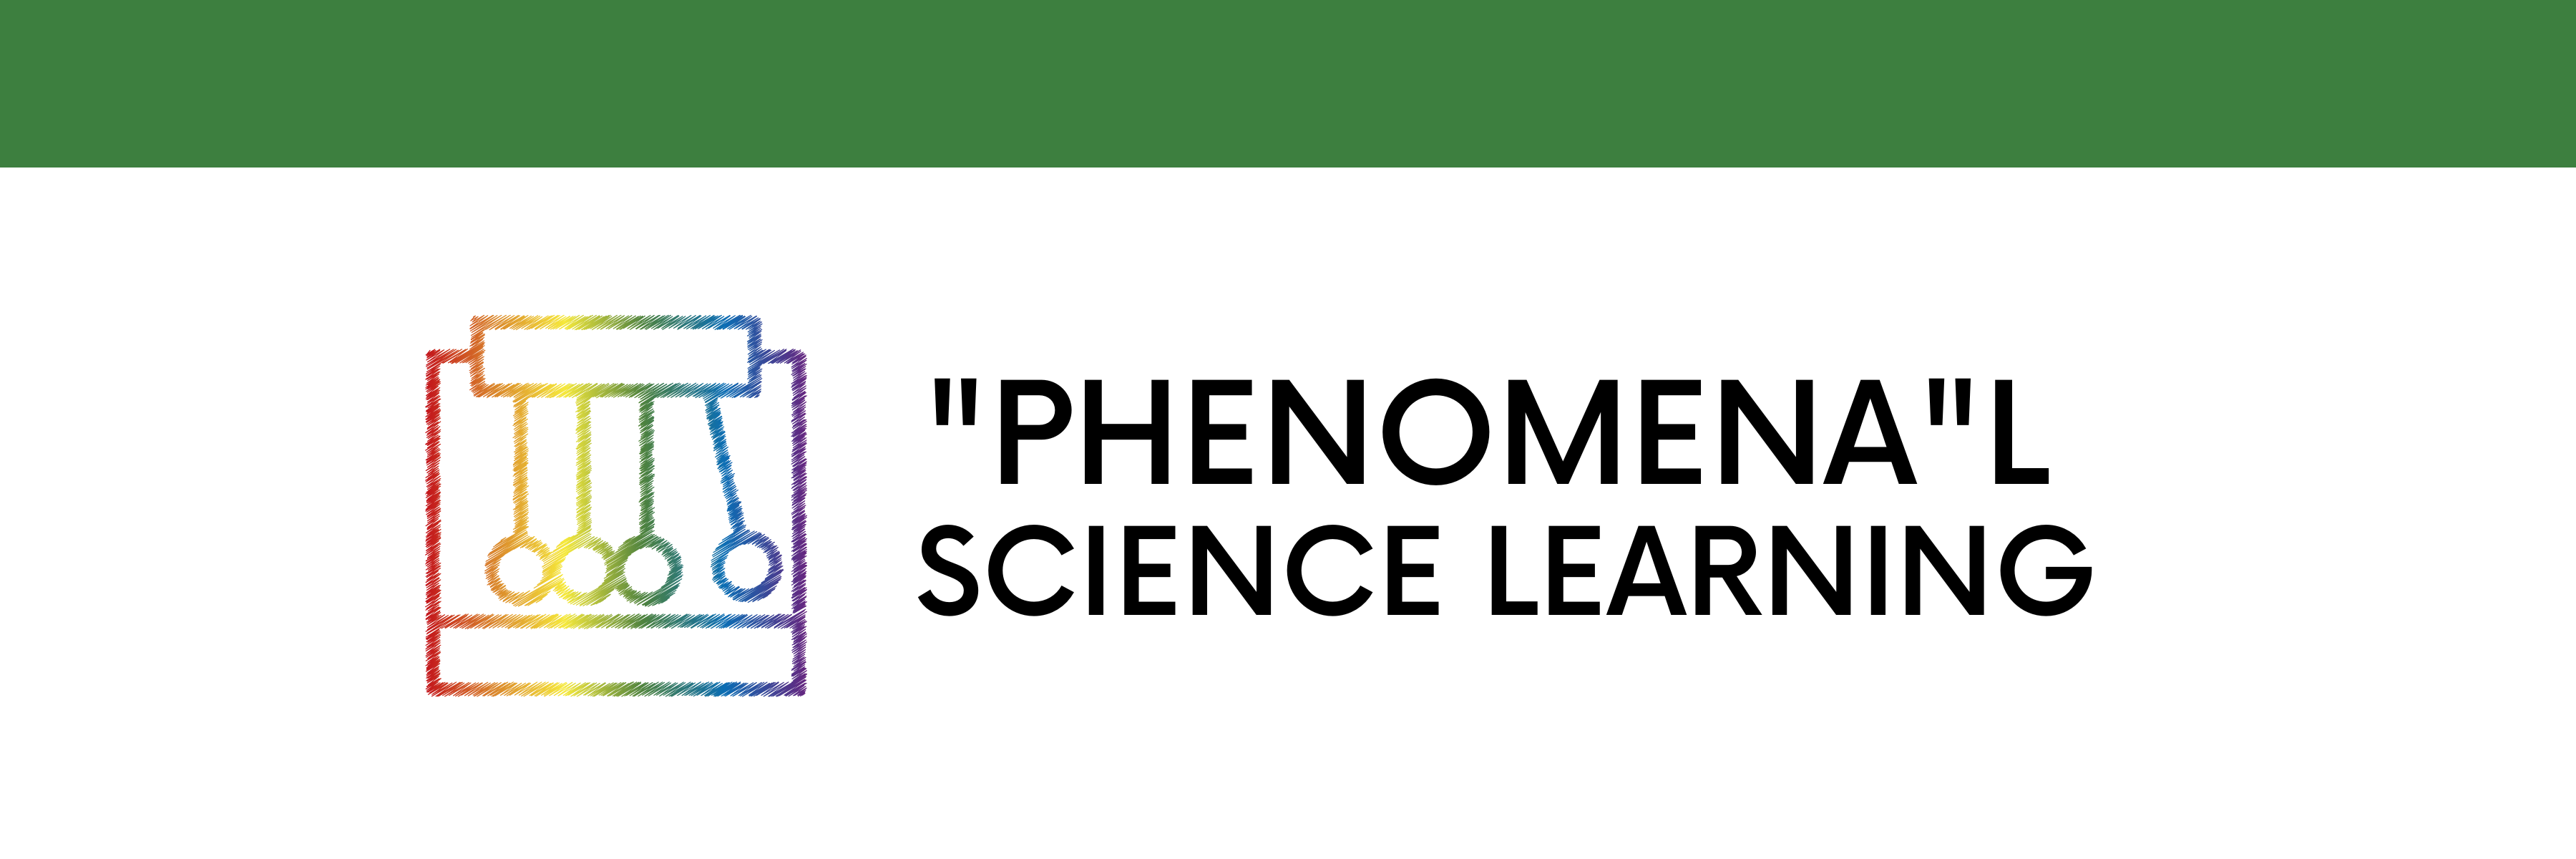 Phenomenal Science Learning course header image